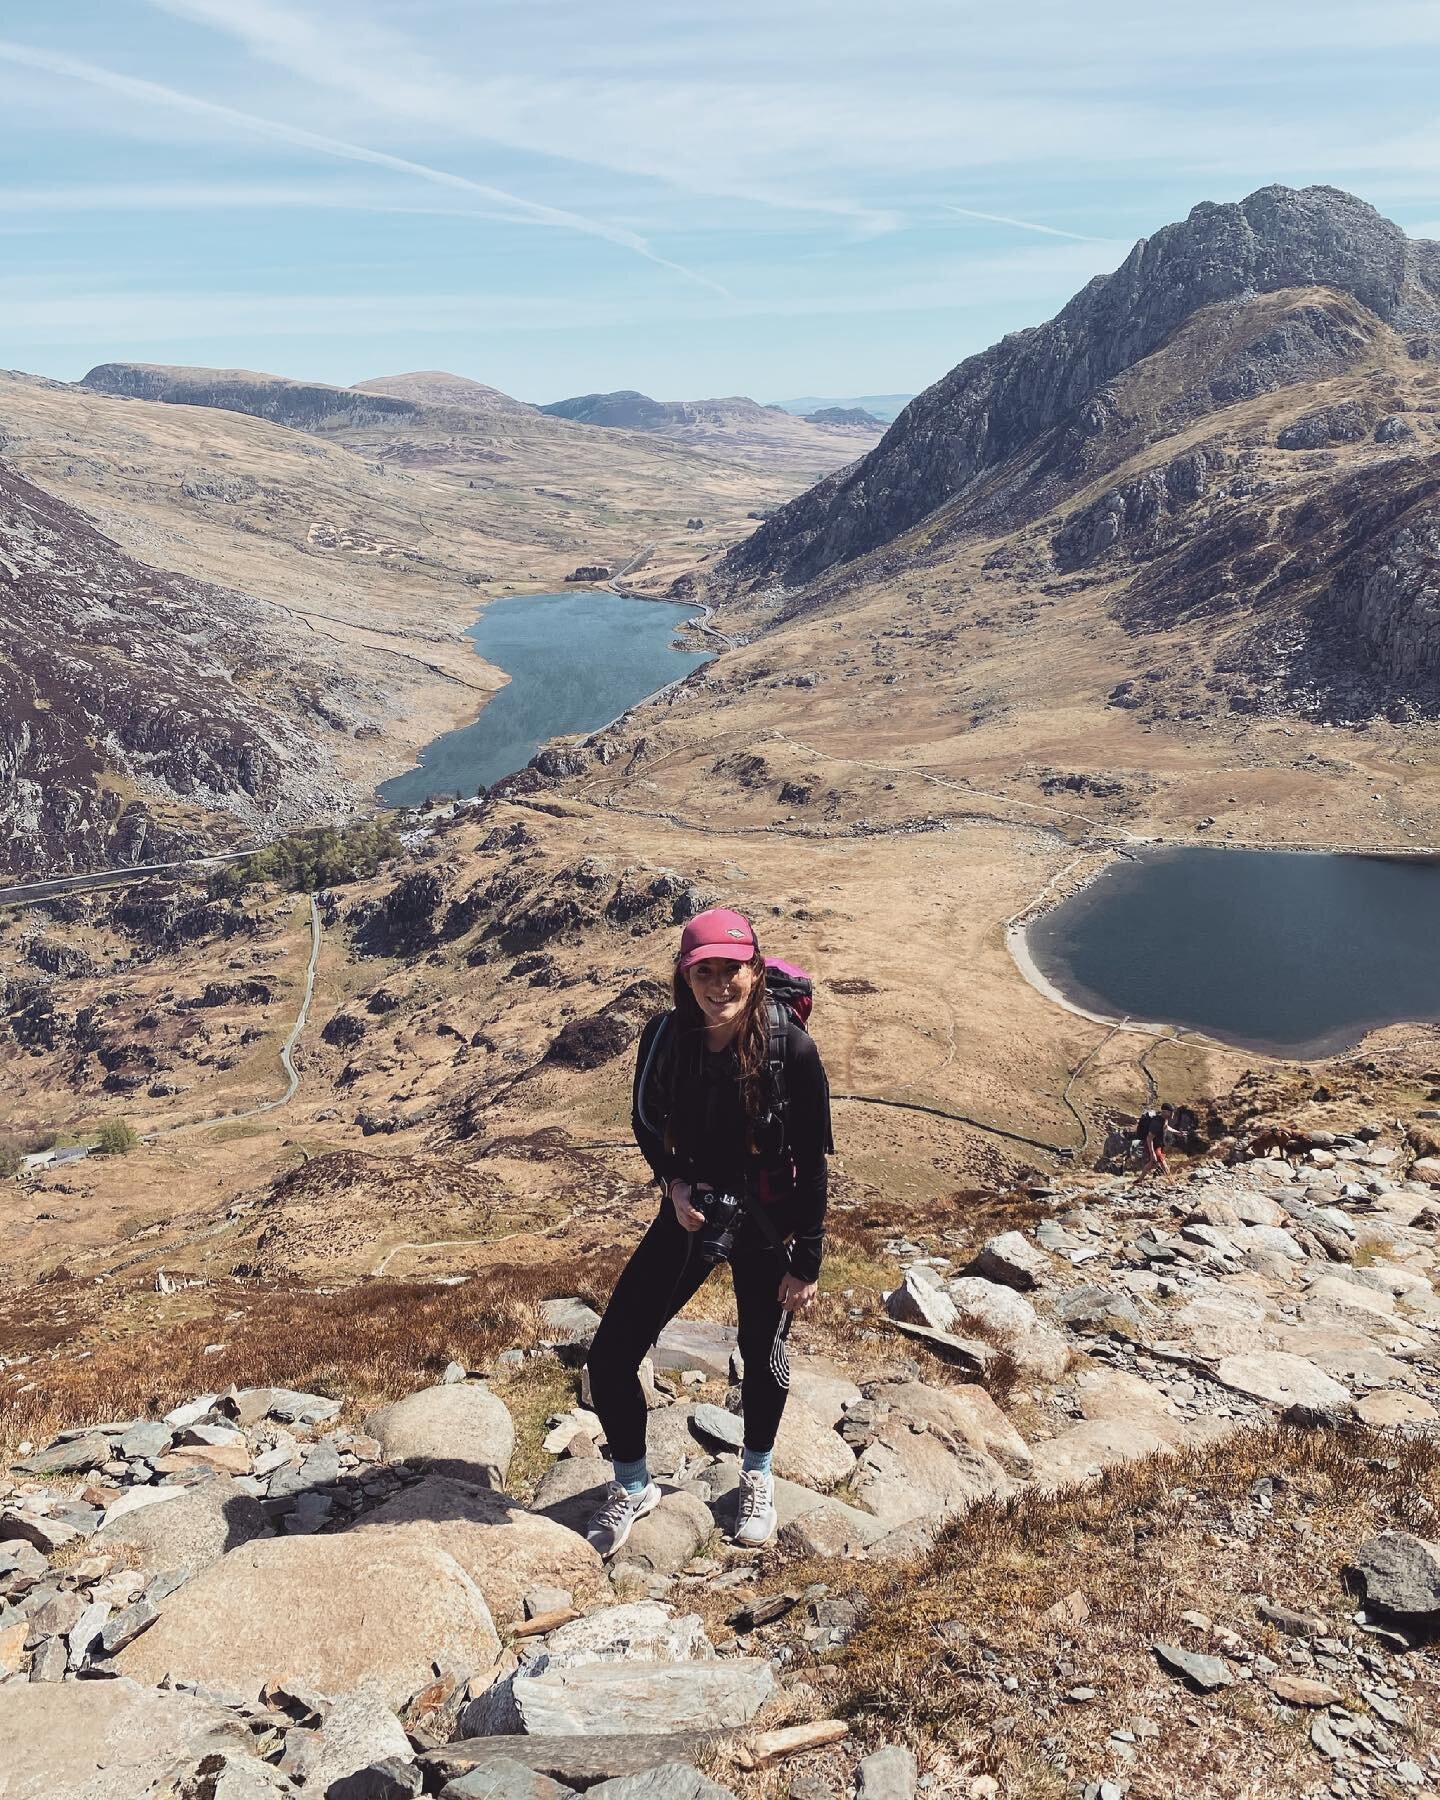 The Mountains Are My Therapy 💚 

#snowdonia #yourhikes #your_wales #your_hikes #uk_0utdoors #uk_shots #wildwomenuk #uktrigbagging #ukhiking #staycation #northwales #visitwales #welshmountain #ygarn #cwmidwal #llynidwal #devilskitchen #adventure #tra